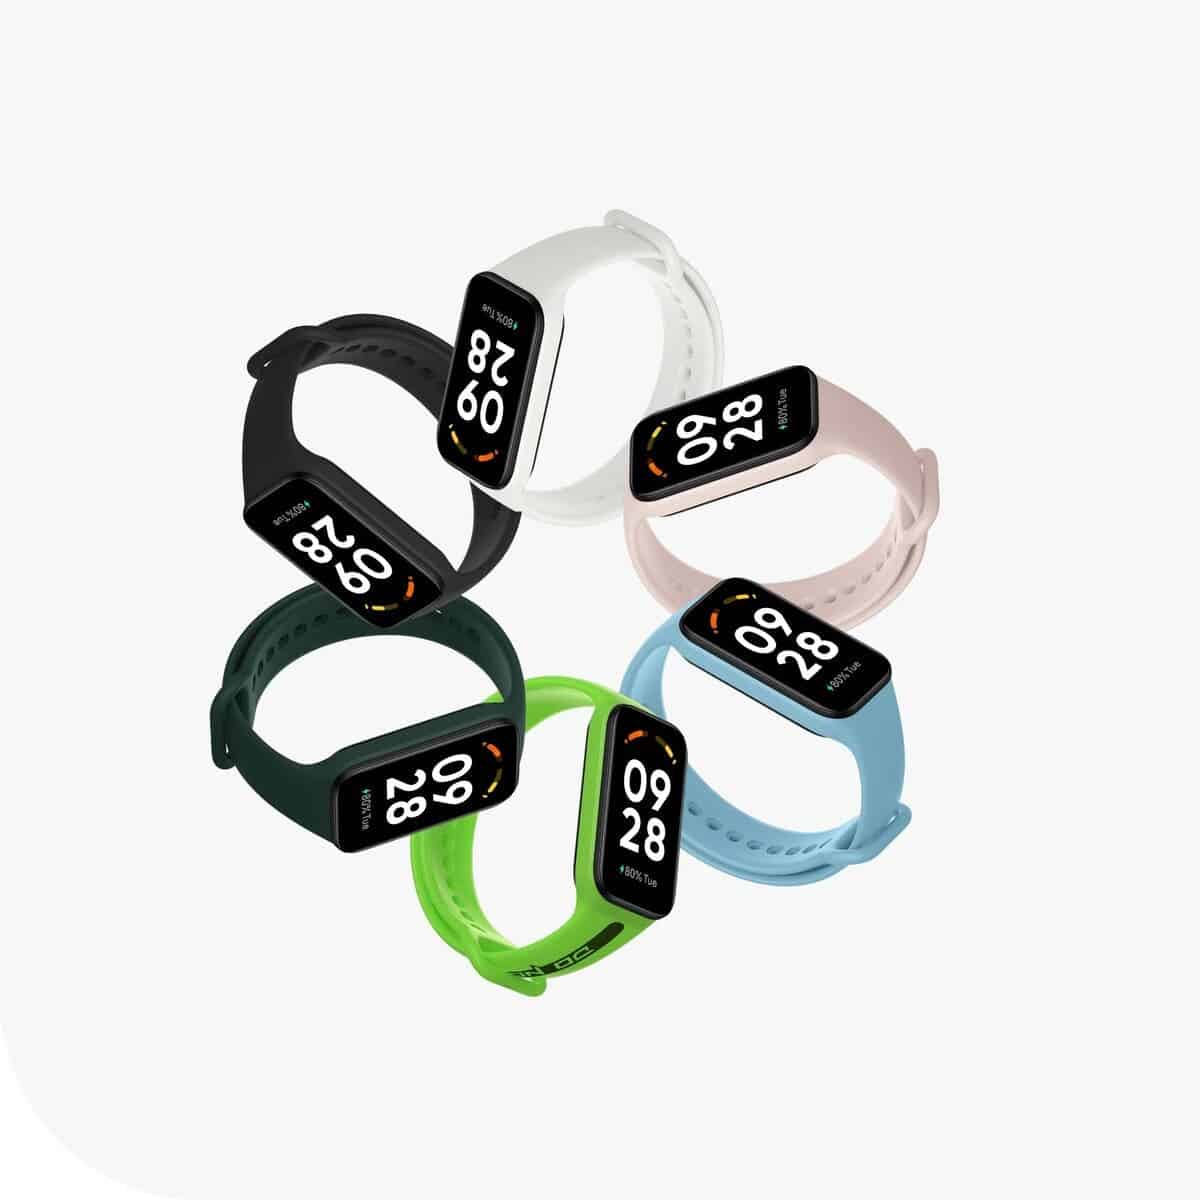 Redmi Smart Band 2 is launched with 2 weeks of battery life